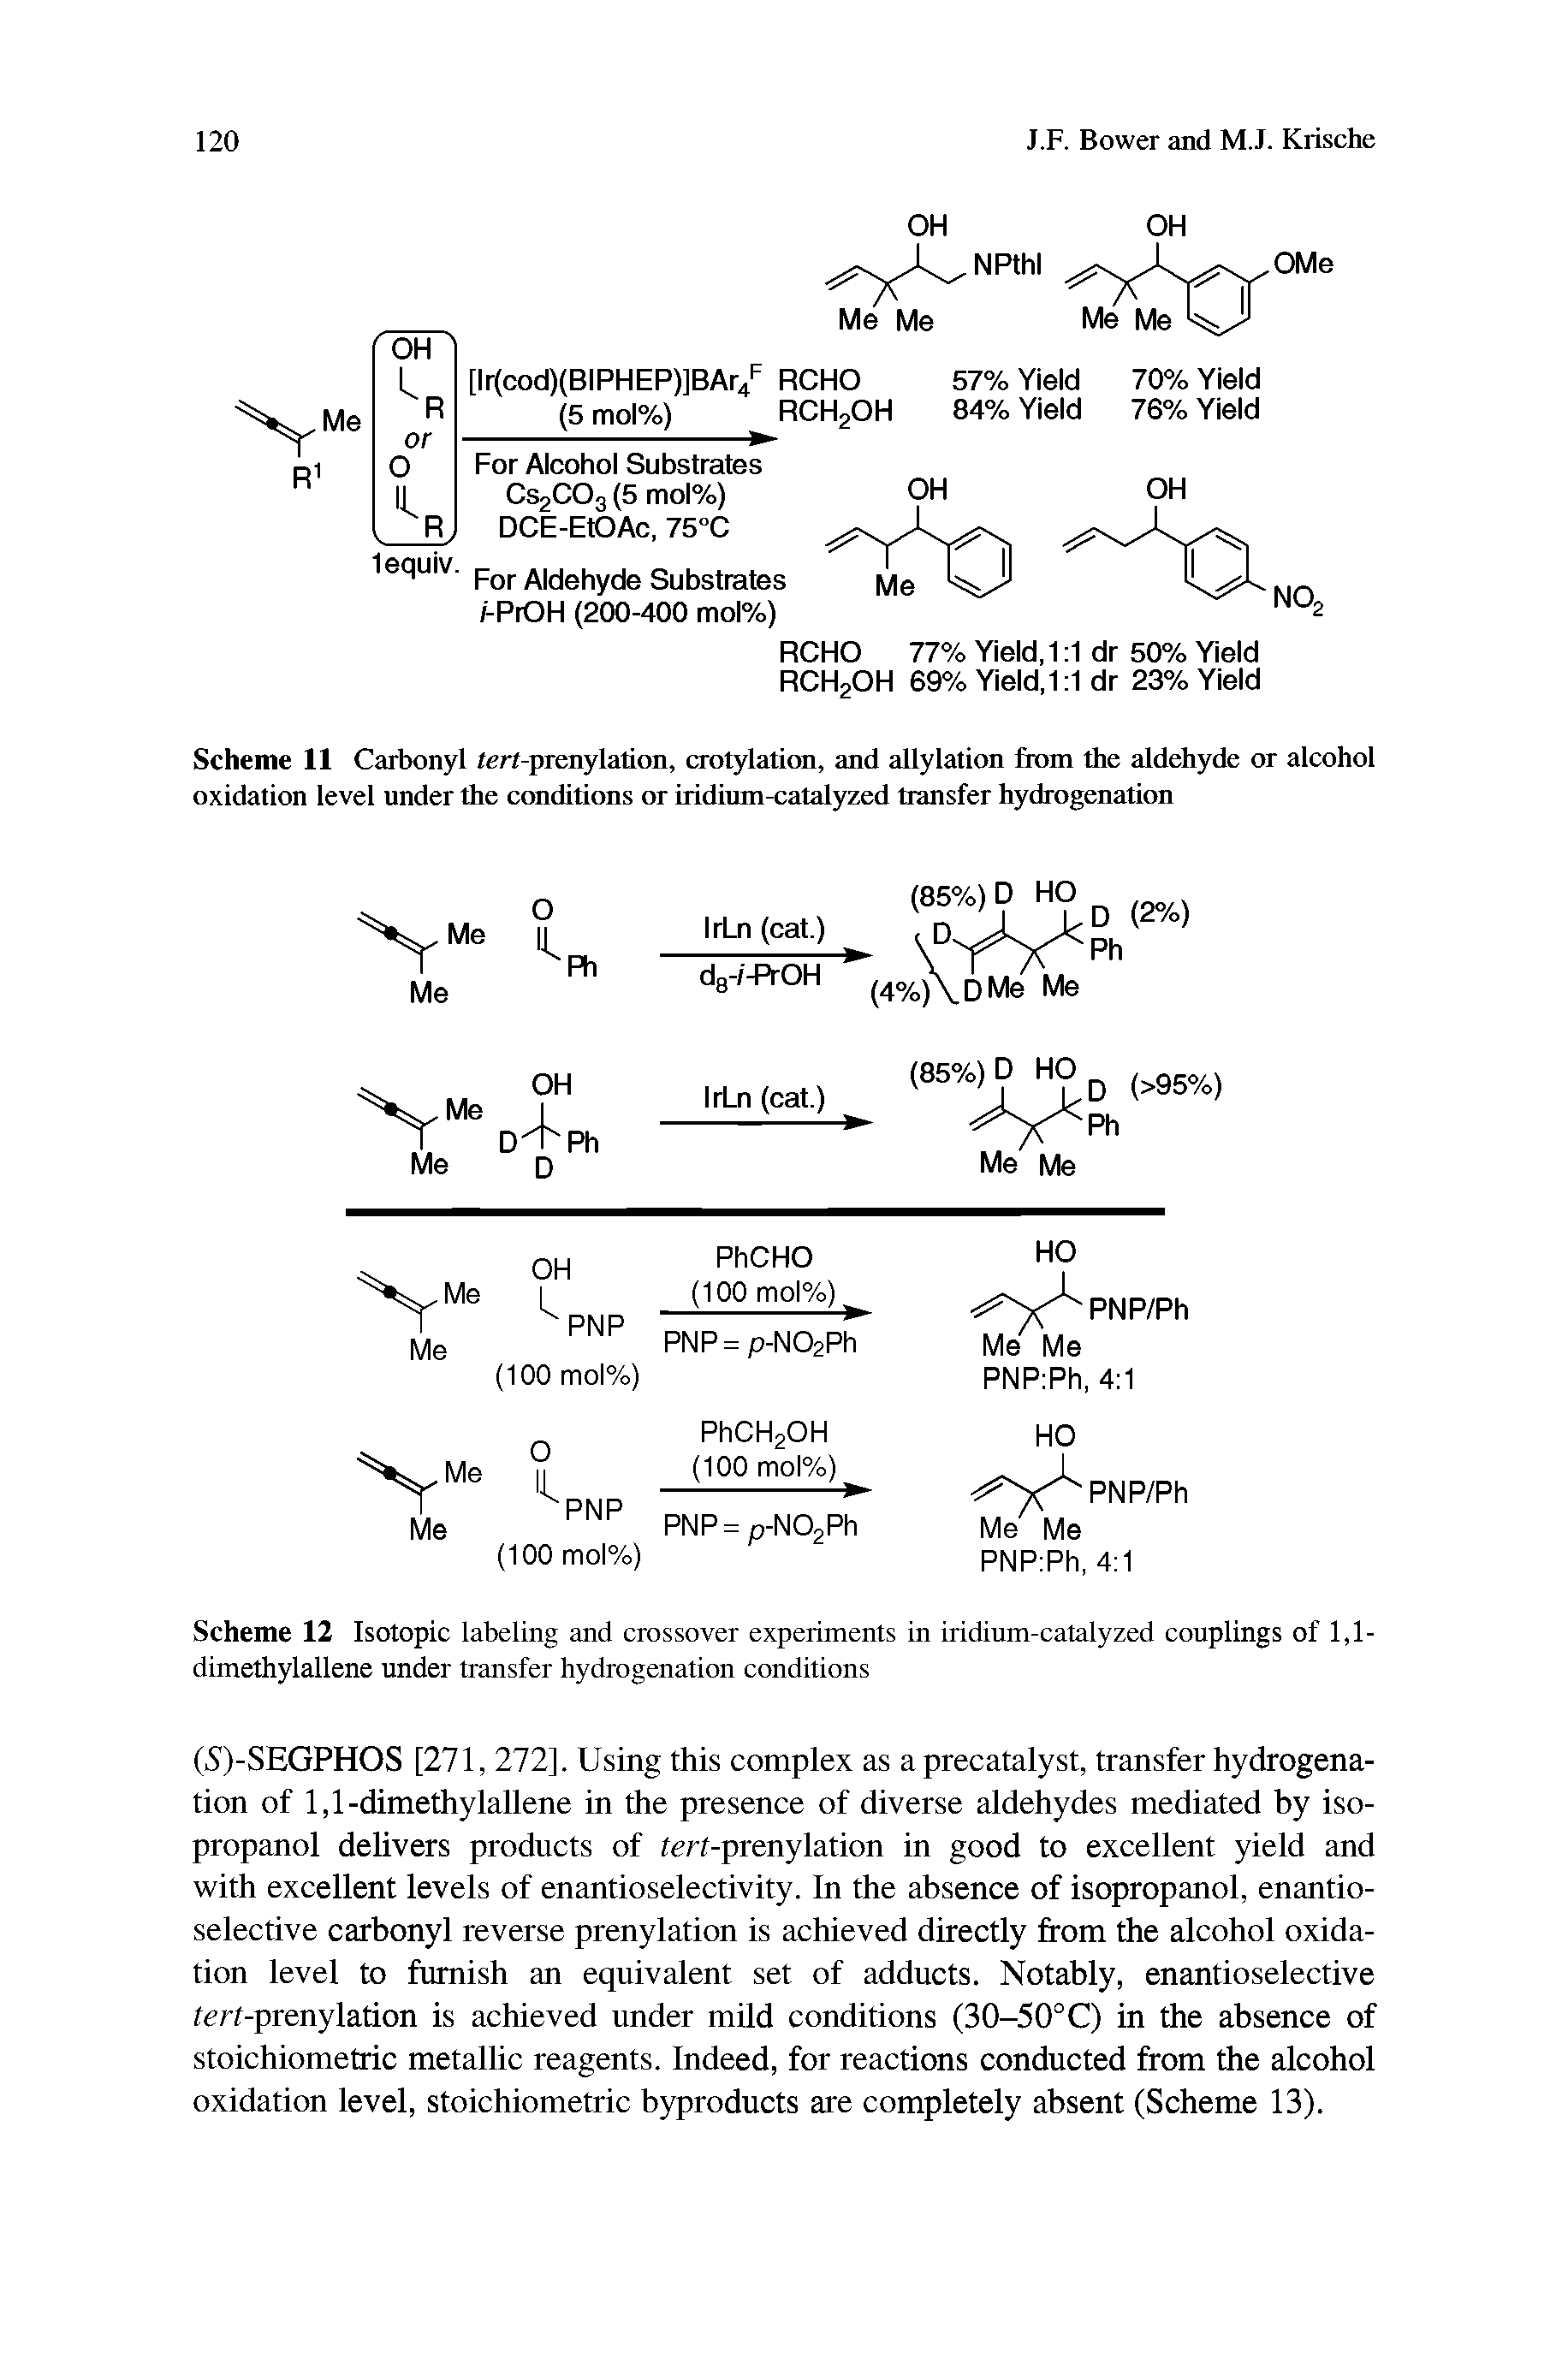 Scheme 11 Carbonyl tert-prenylation, crotylation, and allylation from the aldehyde or alcohol oxidation level under the conditions or iridium-catalyzed transfer hydrogenation...